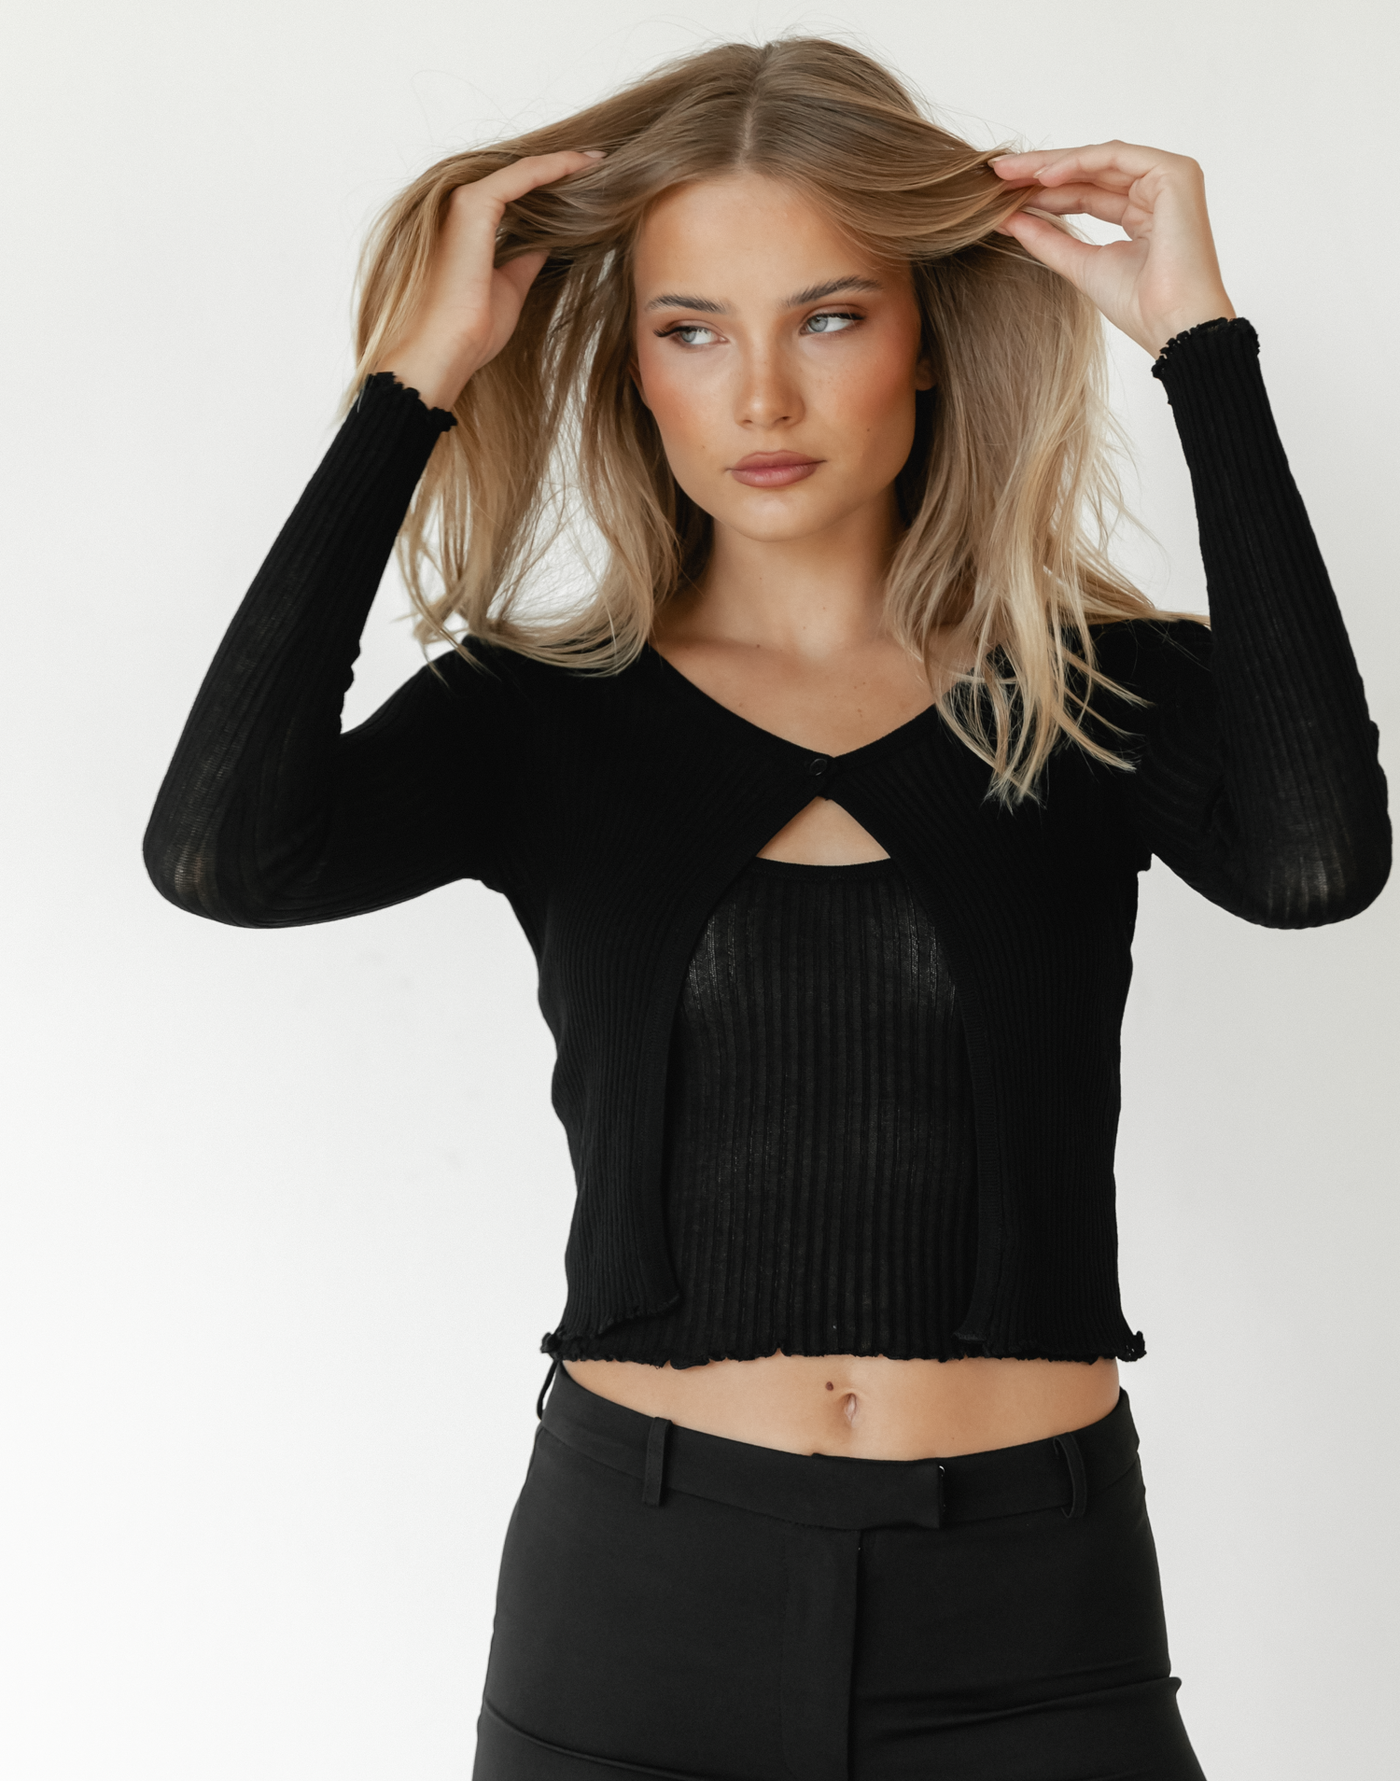 Kodie Two Piece Top (Black) - Black Cami and Cardigan Top - Women's Top - Charcoal Clothing